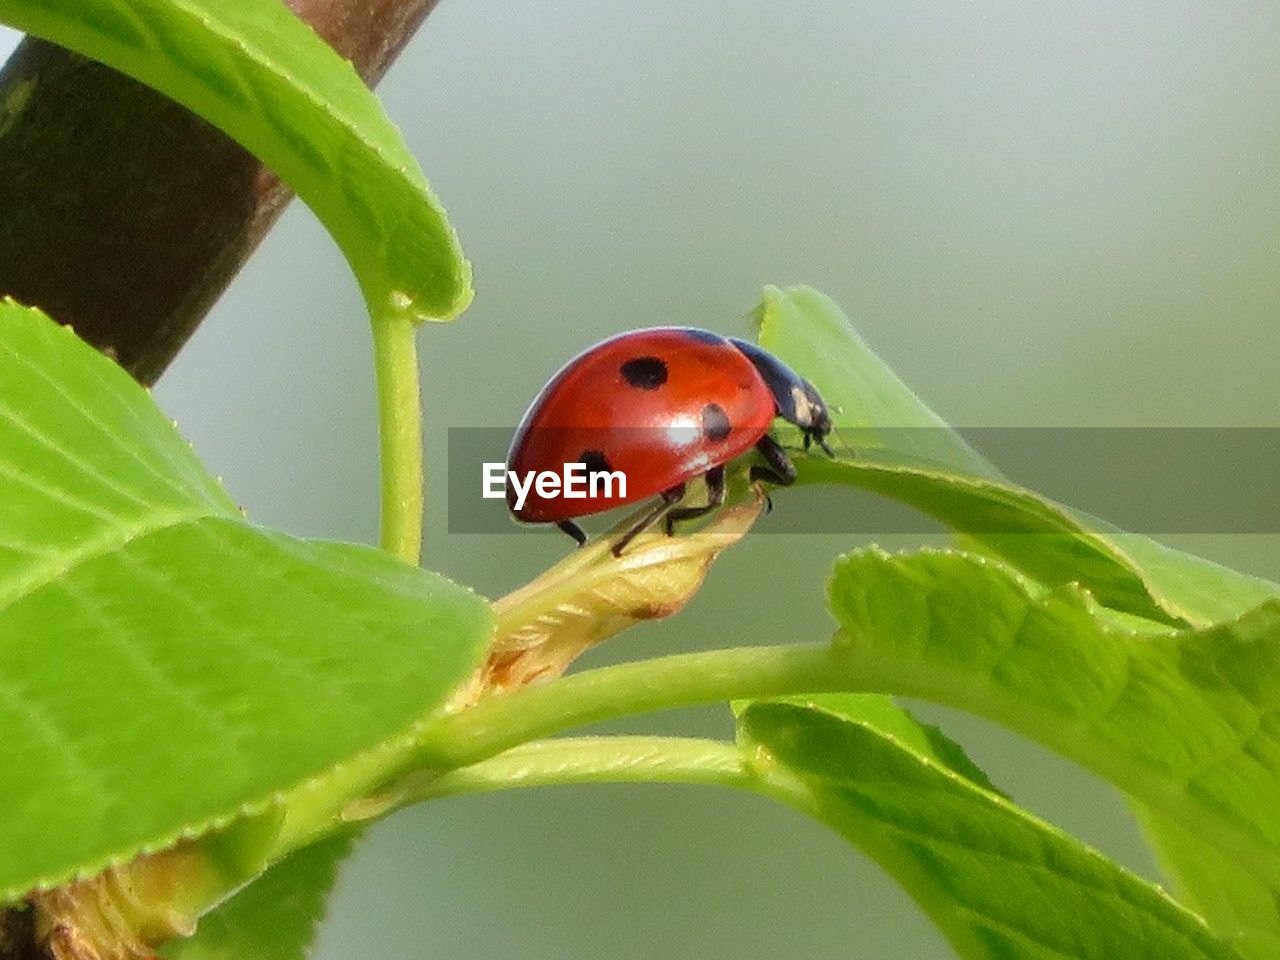 ladybug, animal themes, animal, insect, animal wildlife, plant part, leaf, beetle, one animal, wildlife, plant, nature, close-up, green, macro photography, red, no people, beauty in nature, spotted, focus on foreground, outdoors, day, flower, macro, environment, plant stem